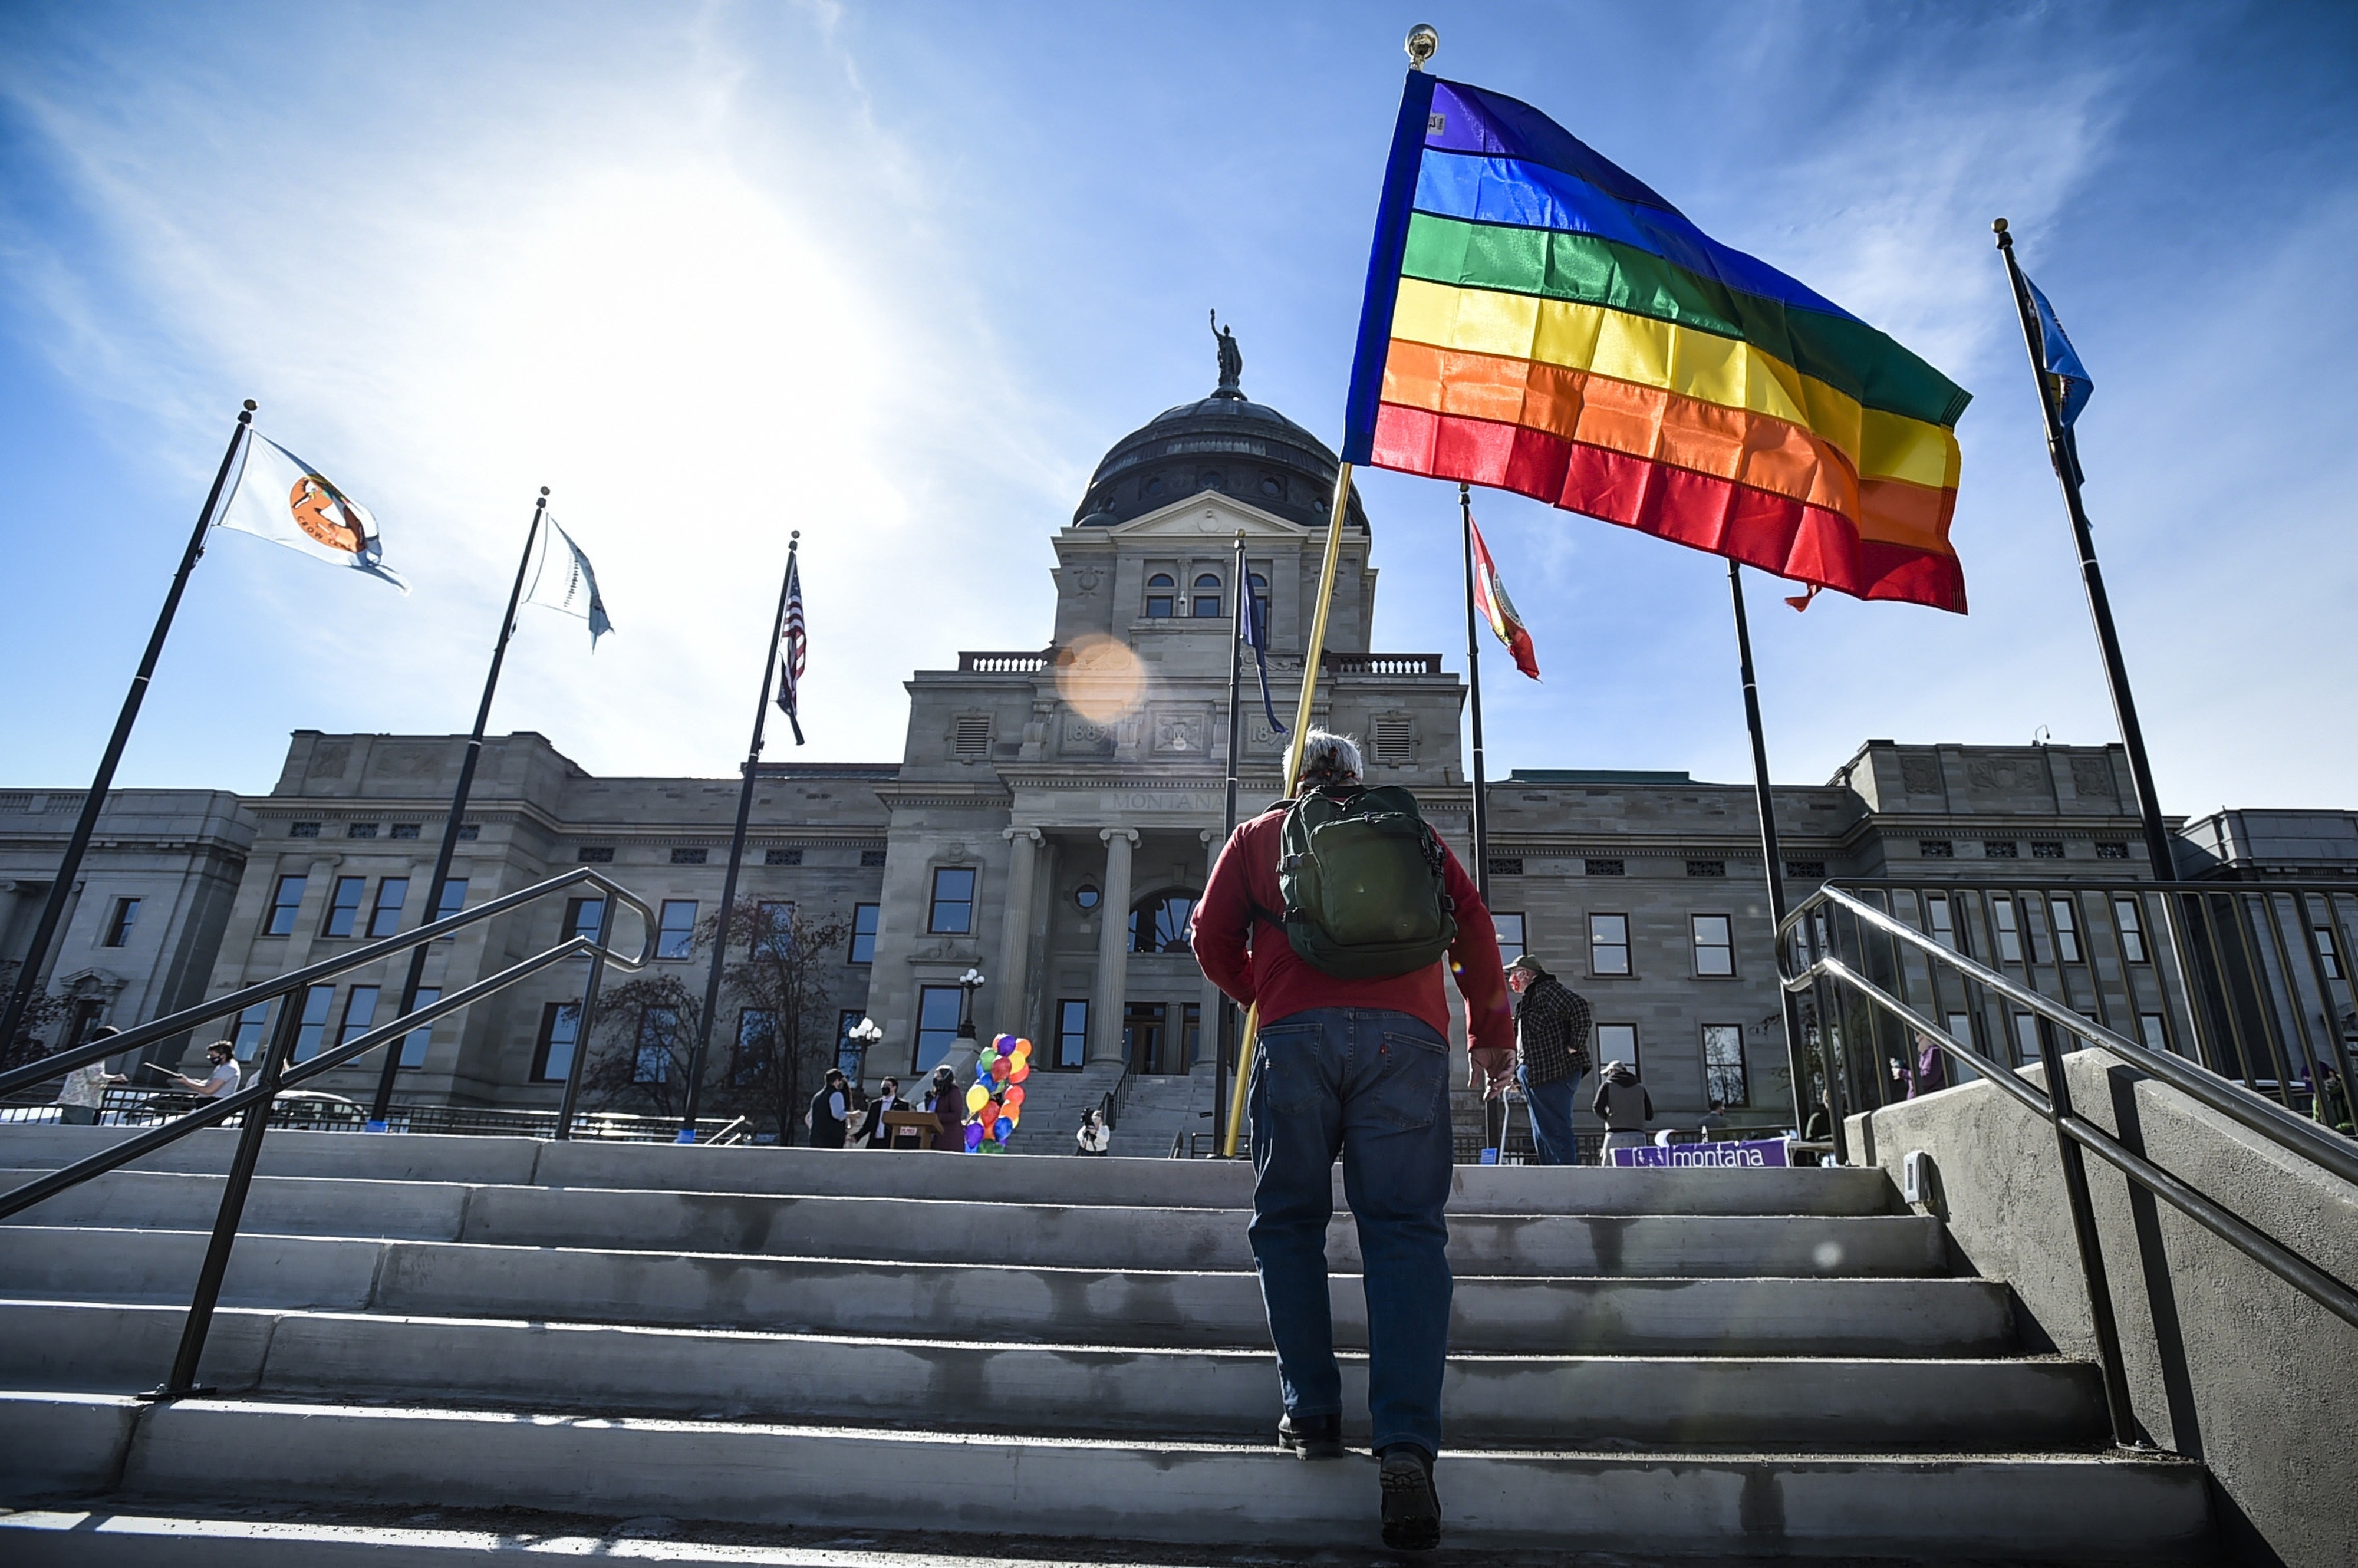 FILE - In this March 15, 2021, file photo Demonstrators gather on the steps of the Montana State Capitol protesting anti-LGBTQ+ legislation in Helena, Mont., March 15, 2021. A judge on Tuesday struck down a Montana law that defined “sex” in state law as only male or female, finding that it was unconstitutional. (Thom Bridge/Independent Record via AP, File)